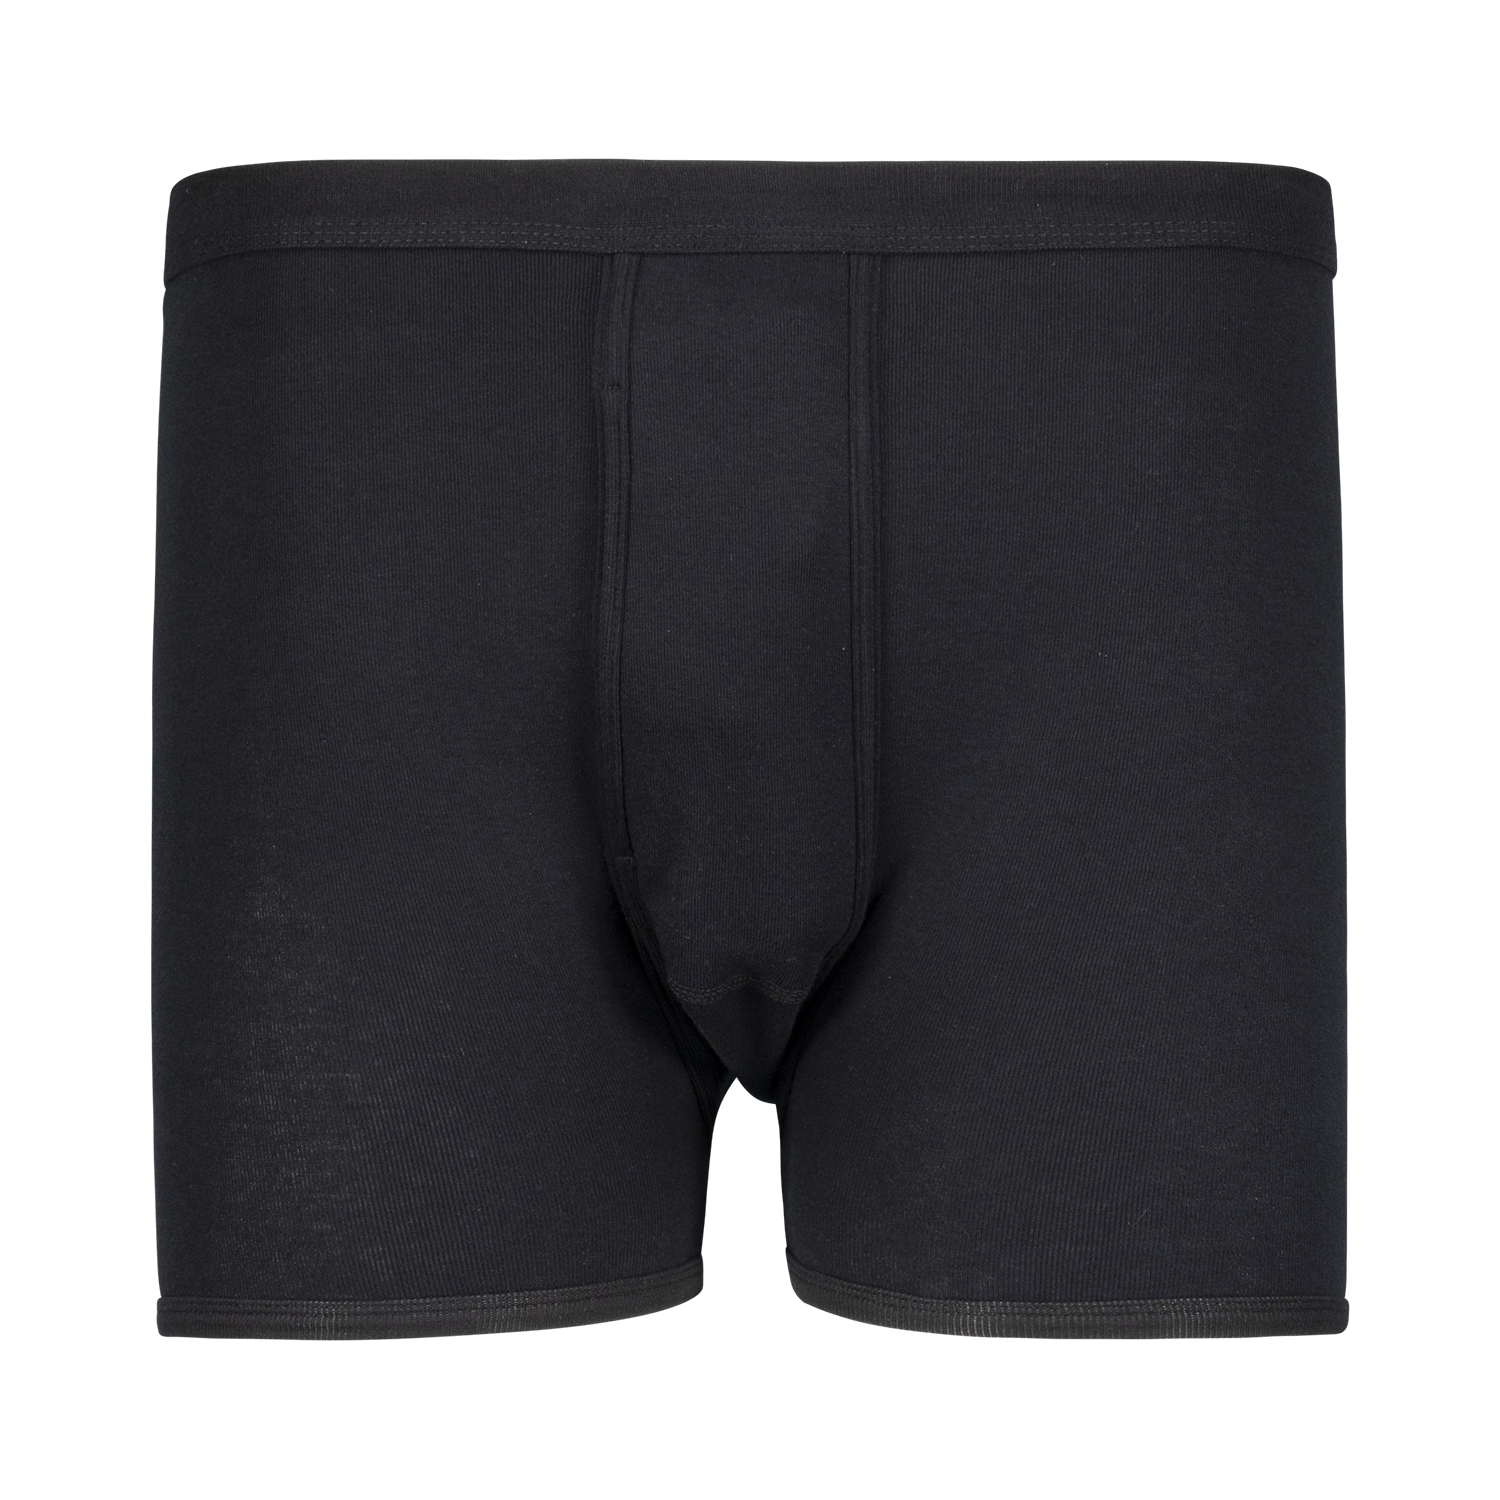 Black short trousers PROYAL (fine rib) from ADAMO in oversizes up to 20